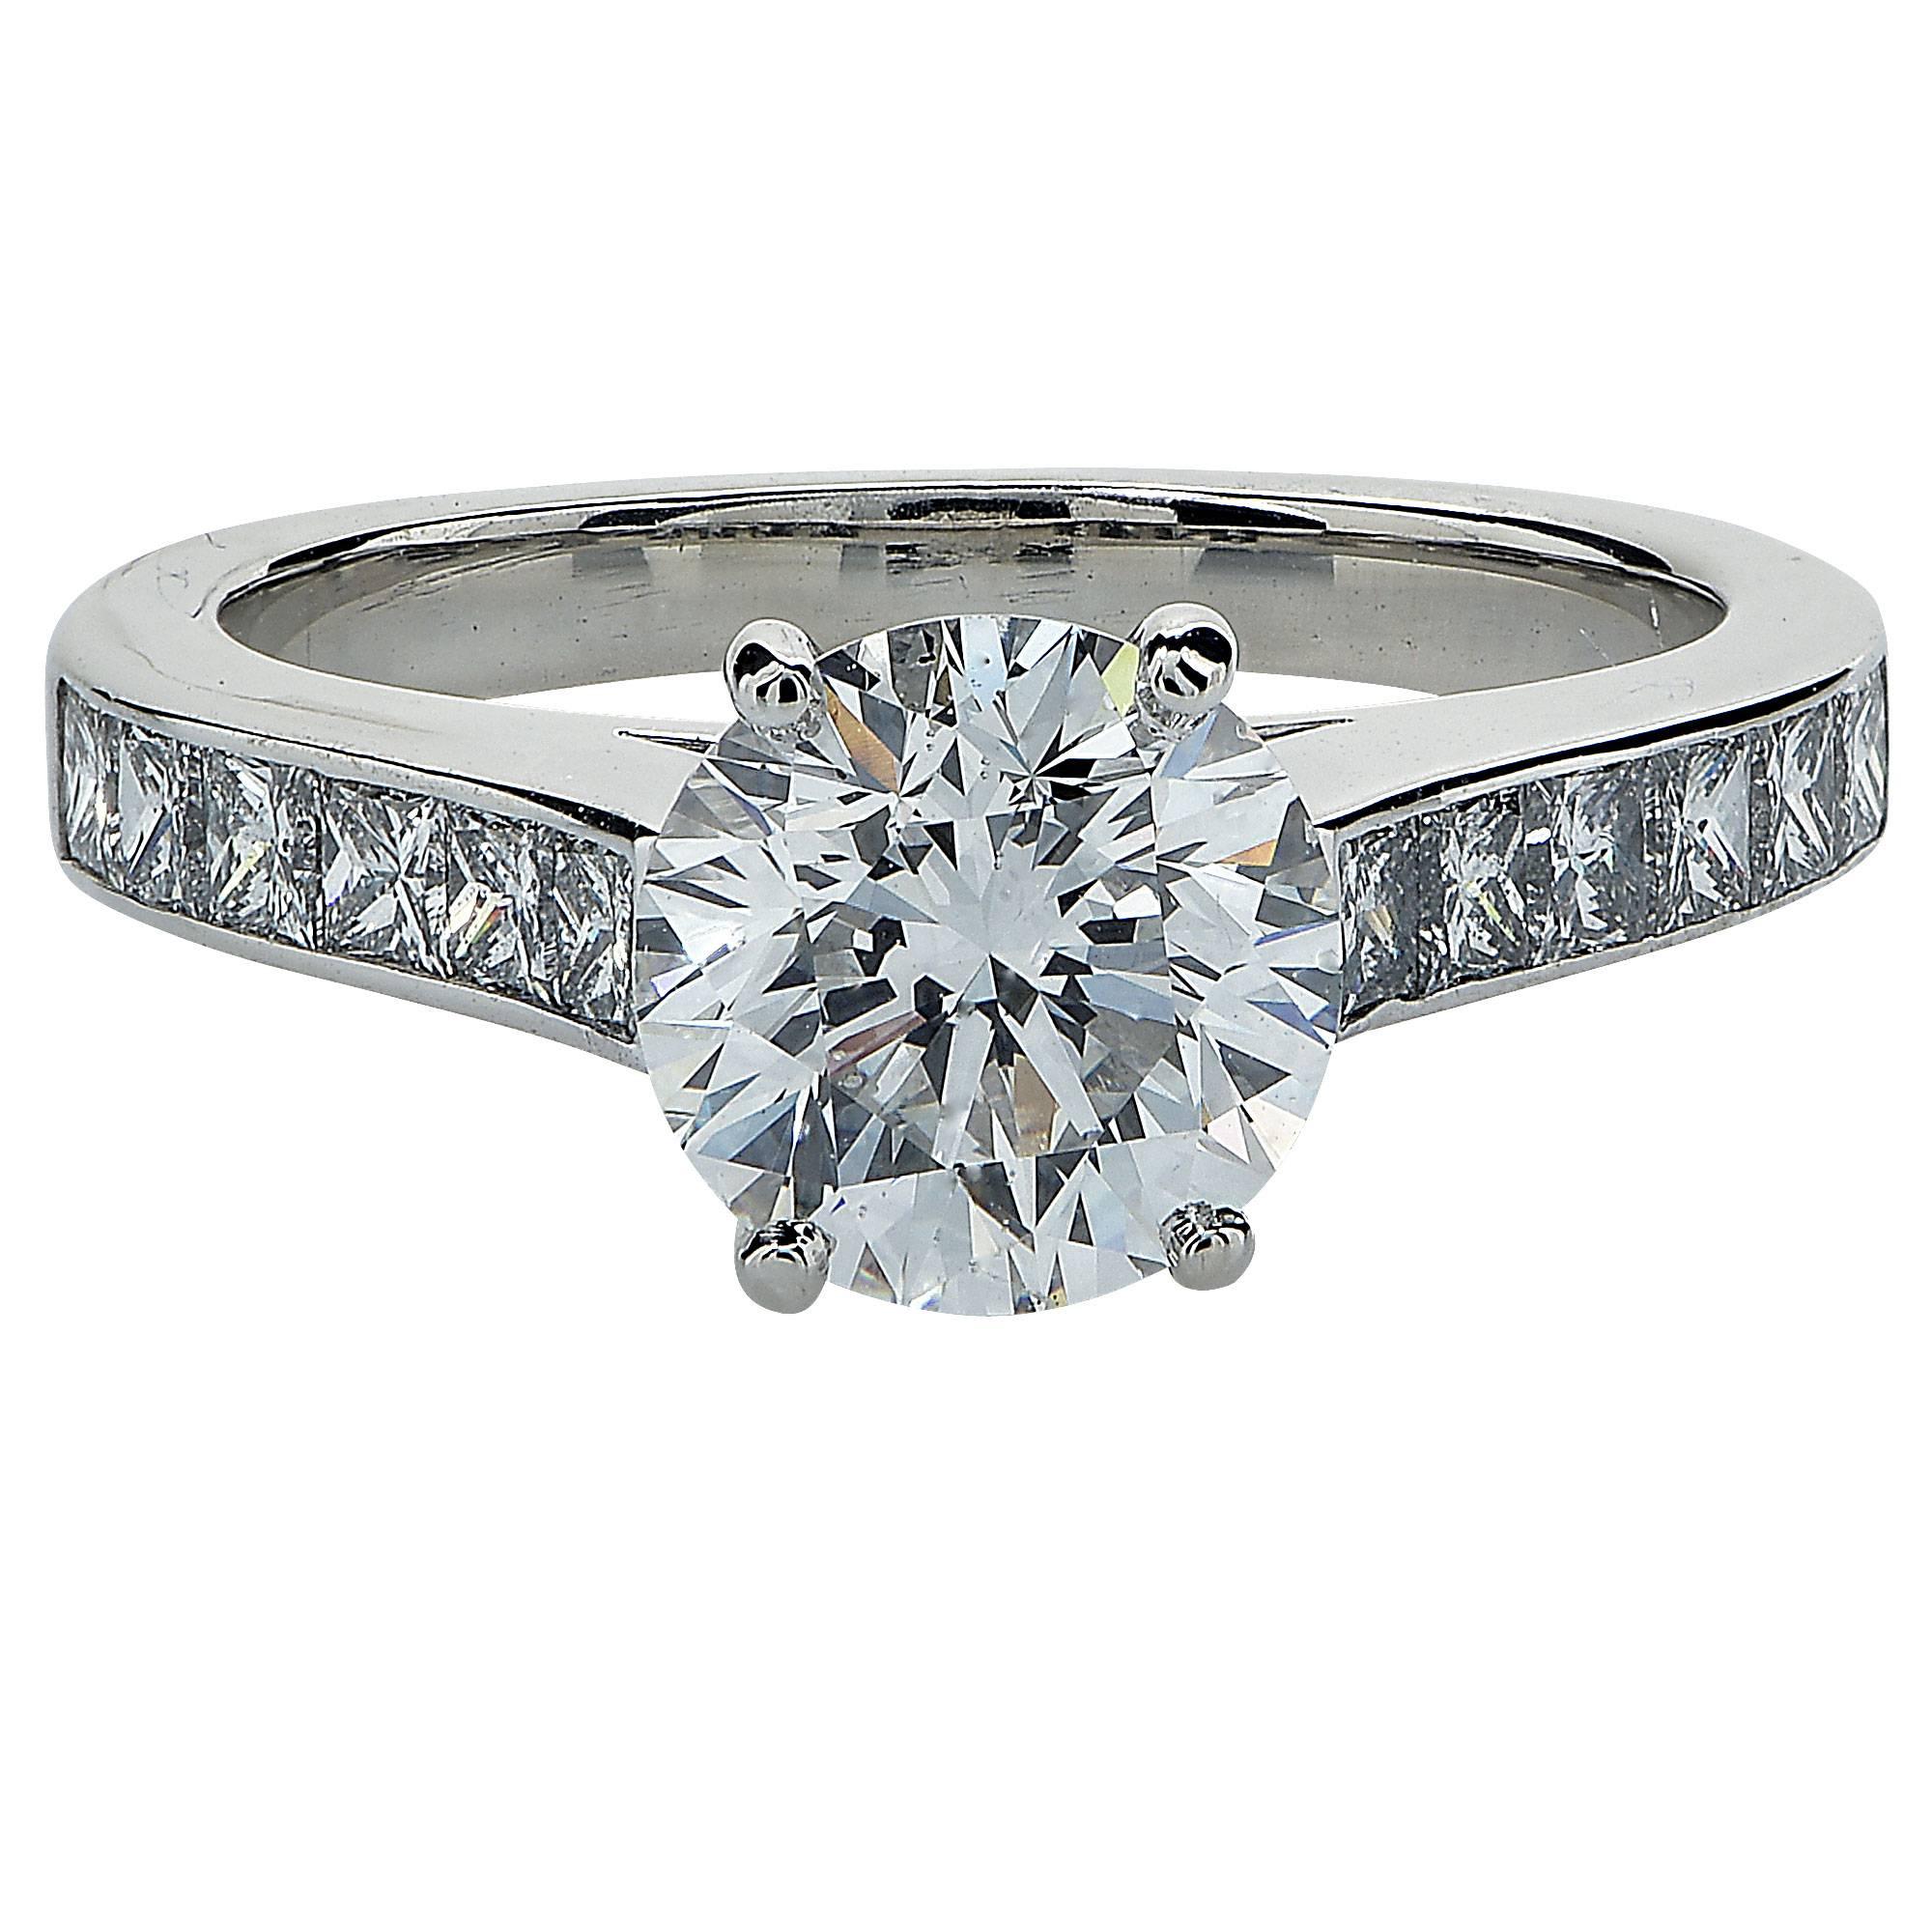 18k white gold ring featuring a GIA graded 1.55ct F color, SI1 clarity round brilliant cut diamond. Accented by 12 princess cut diamonds weighing approximately .60cts total G color, VS clarity. 